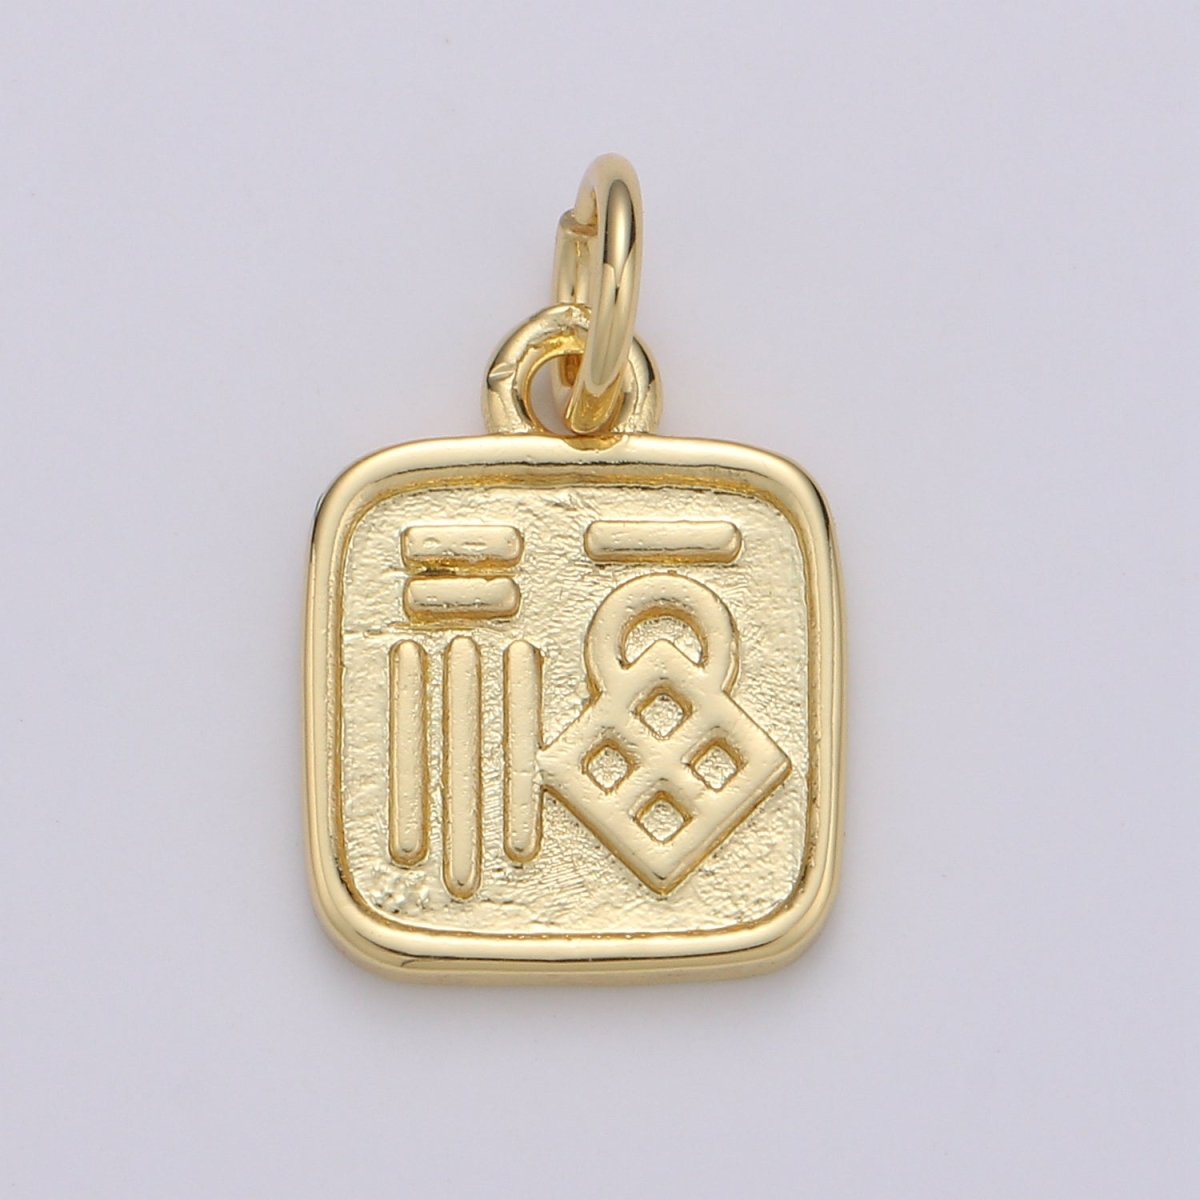 24K Gold Filled Fortune Good Luck "Fu" Chinese Character Charm E-060 - DLUXCA